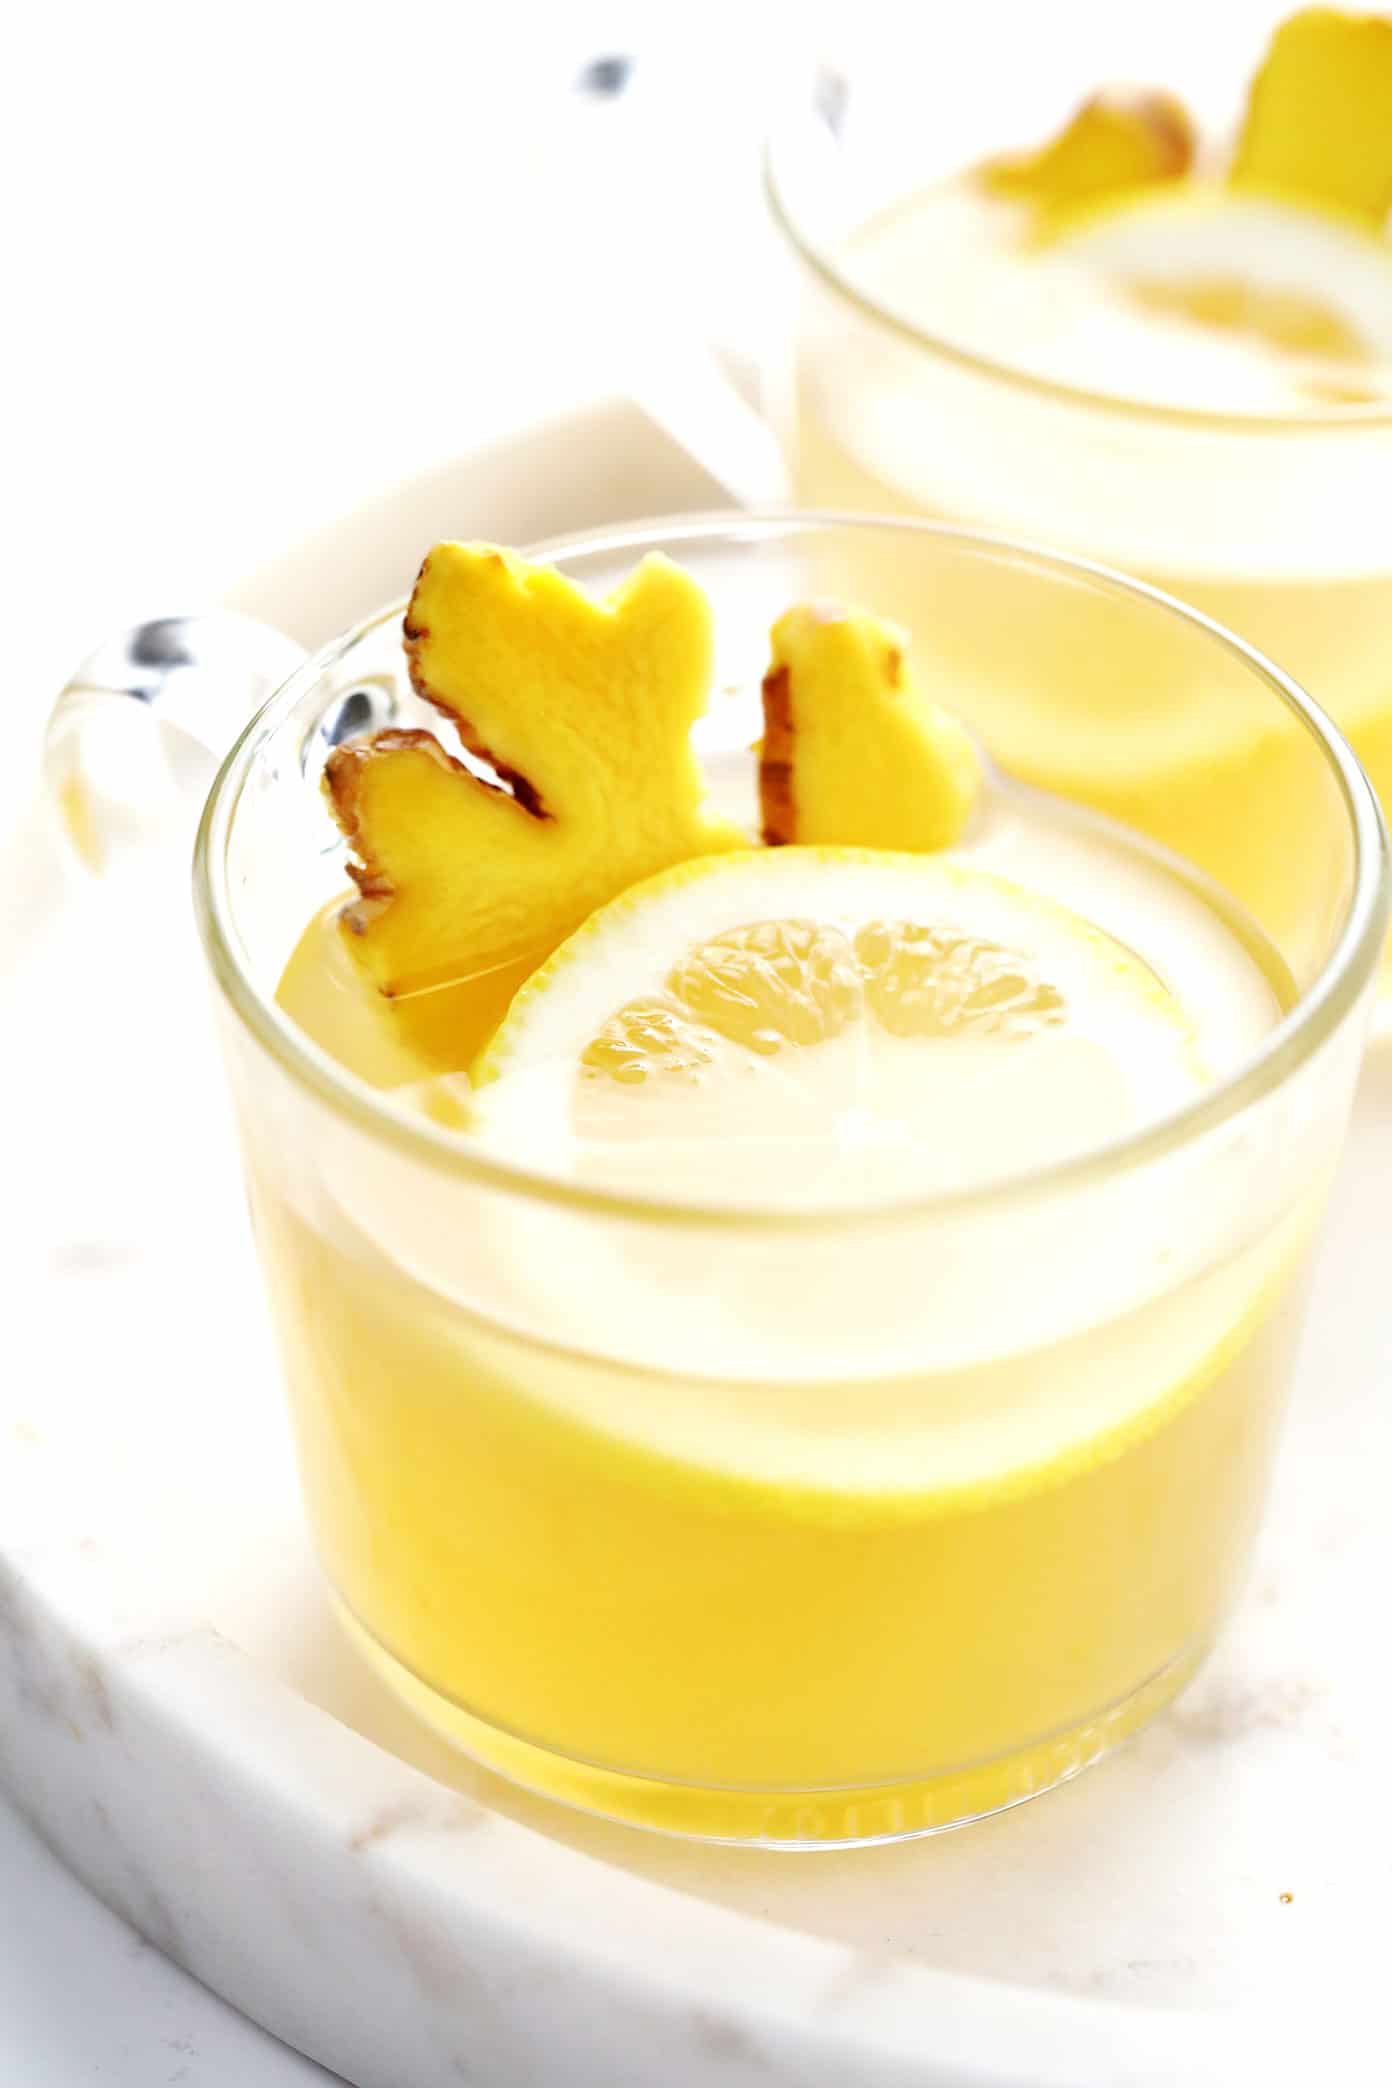 Hot Toddy with Ginger and Lemon Garnishes